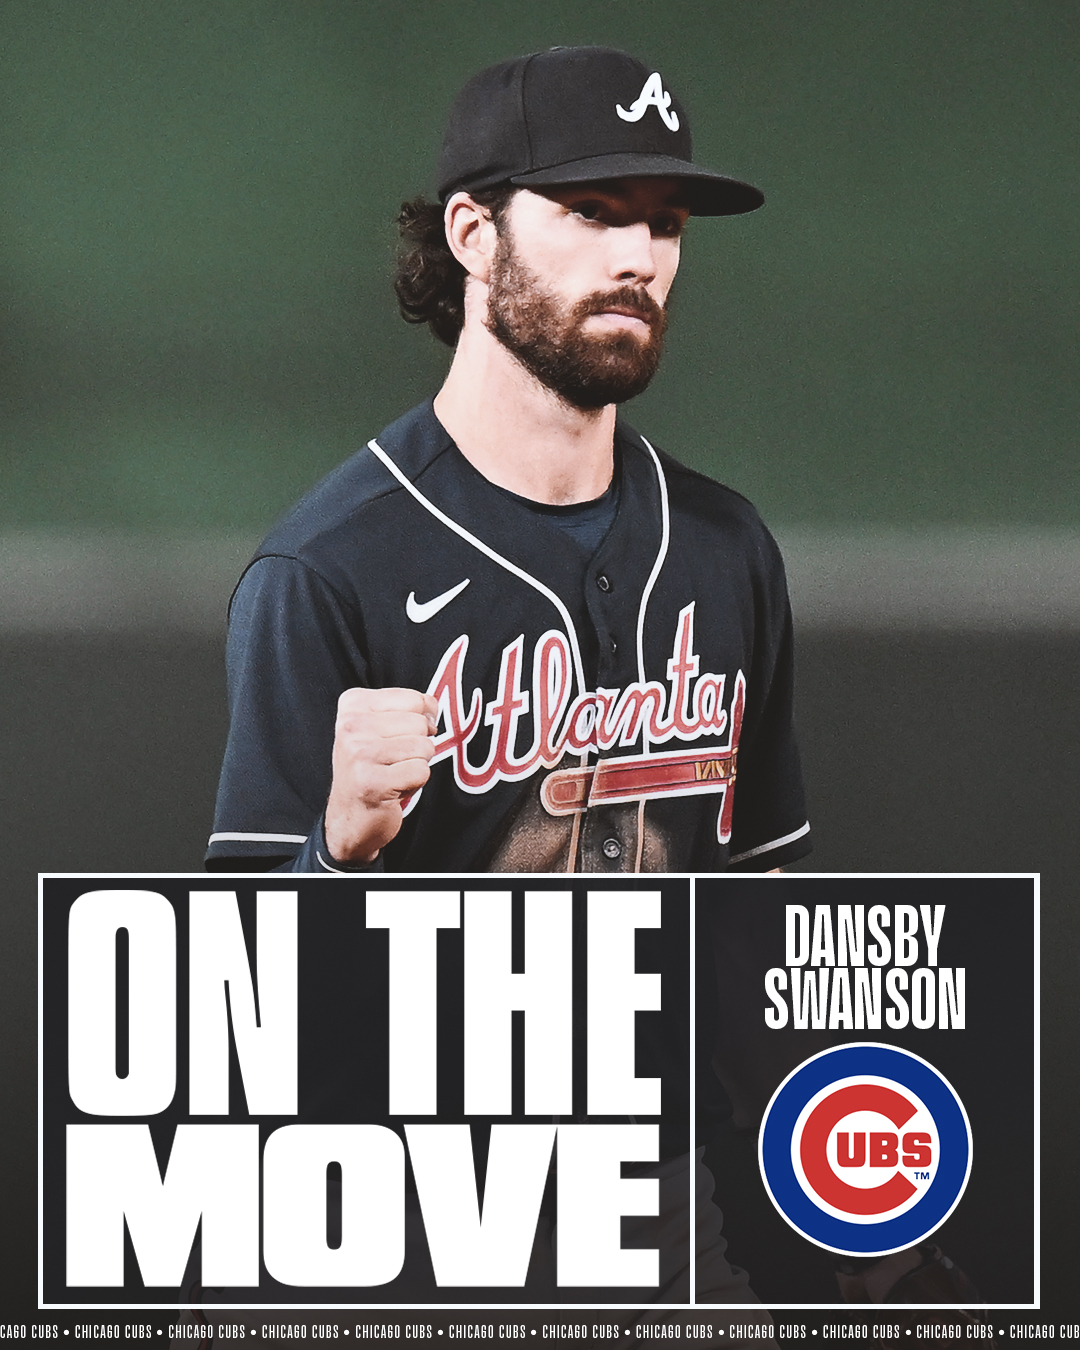 dansby swanson in a cubs jersey